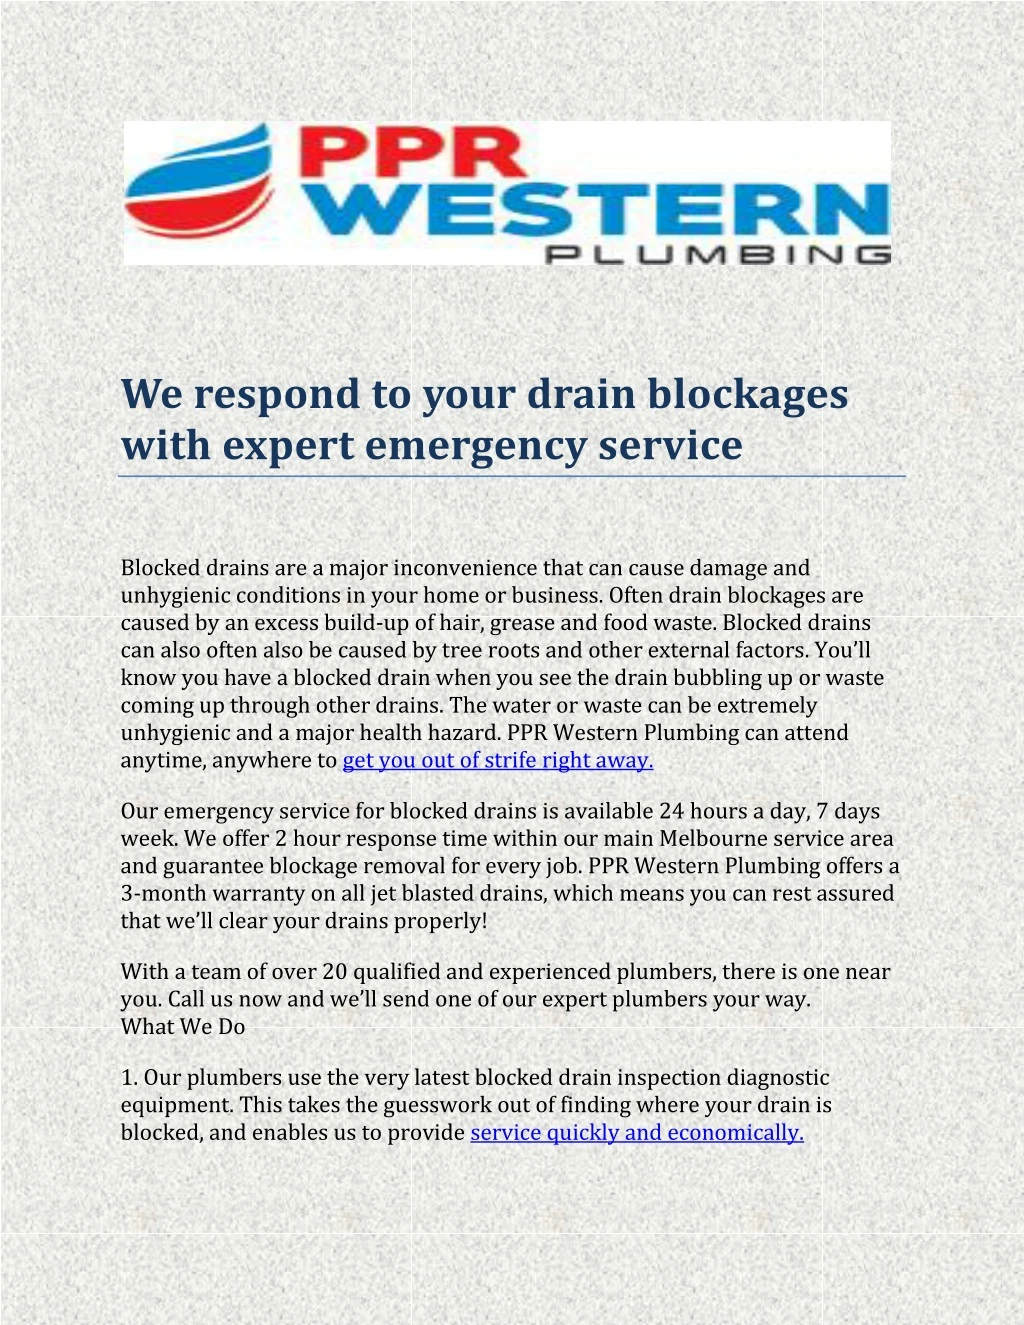 we respond to your drain blockages with expert